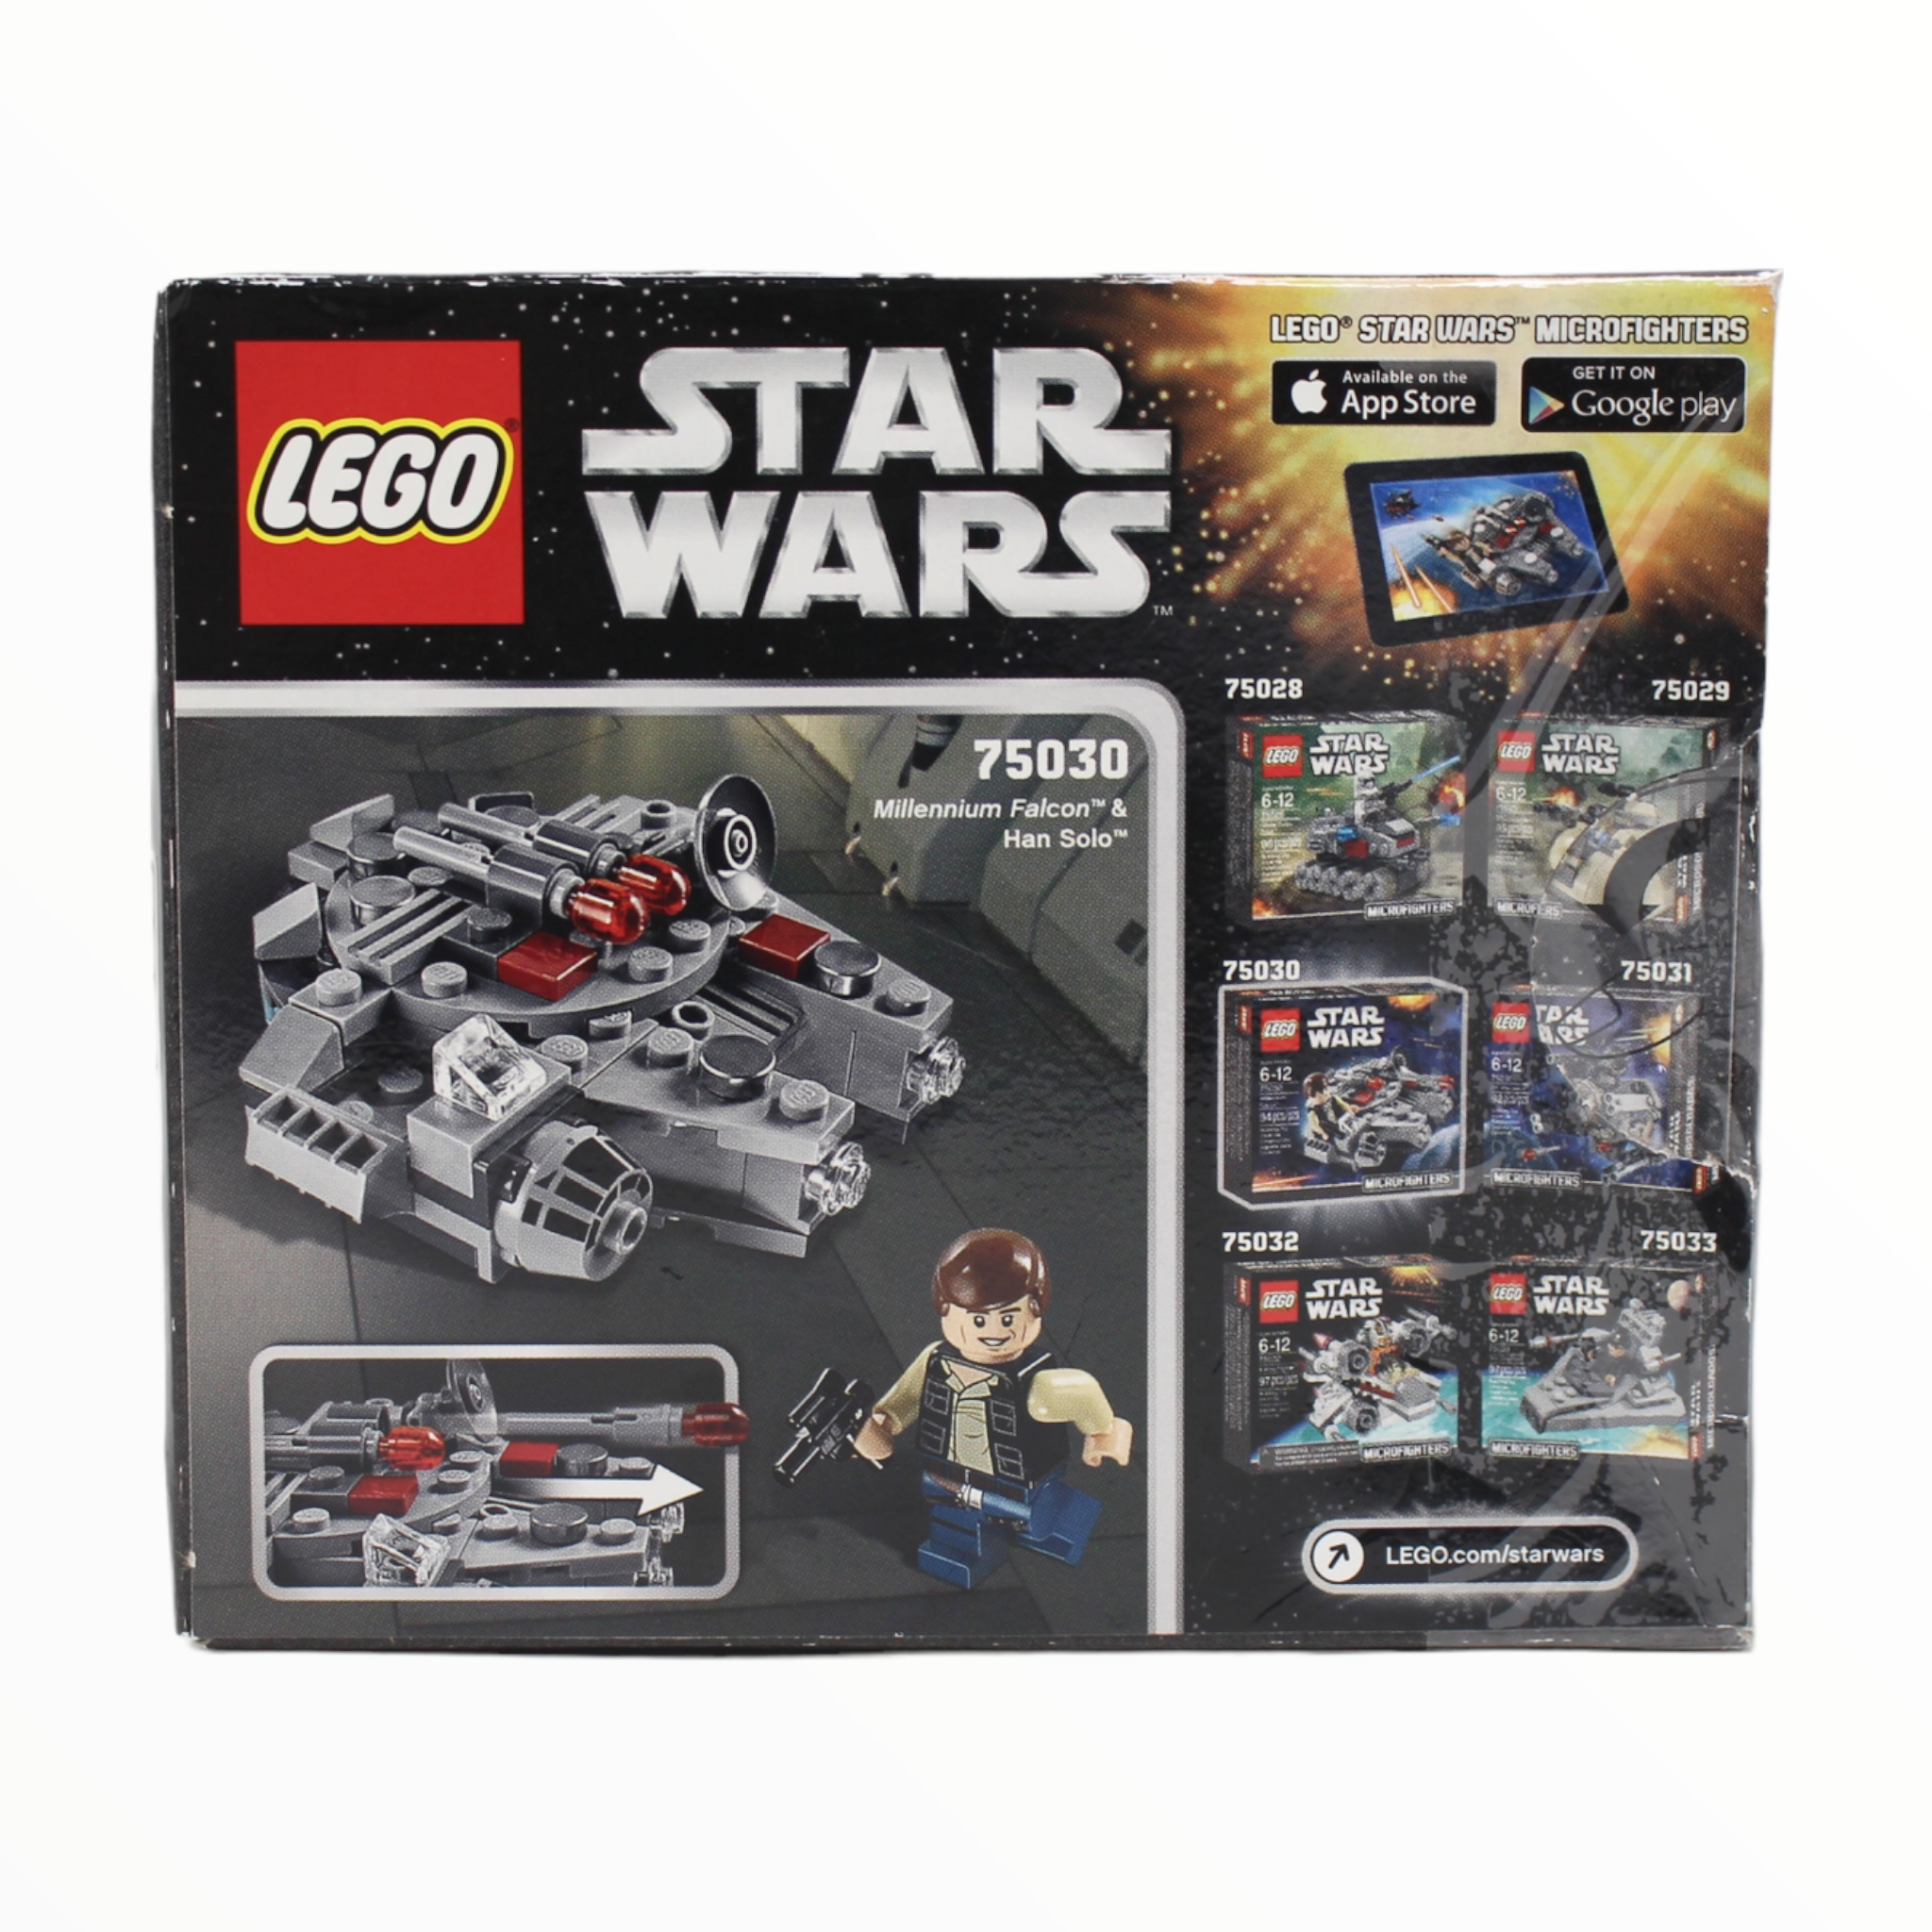 Certified Used Set 75030 Star Wars Millennium Falcon Microfighter (2014)